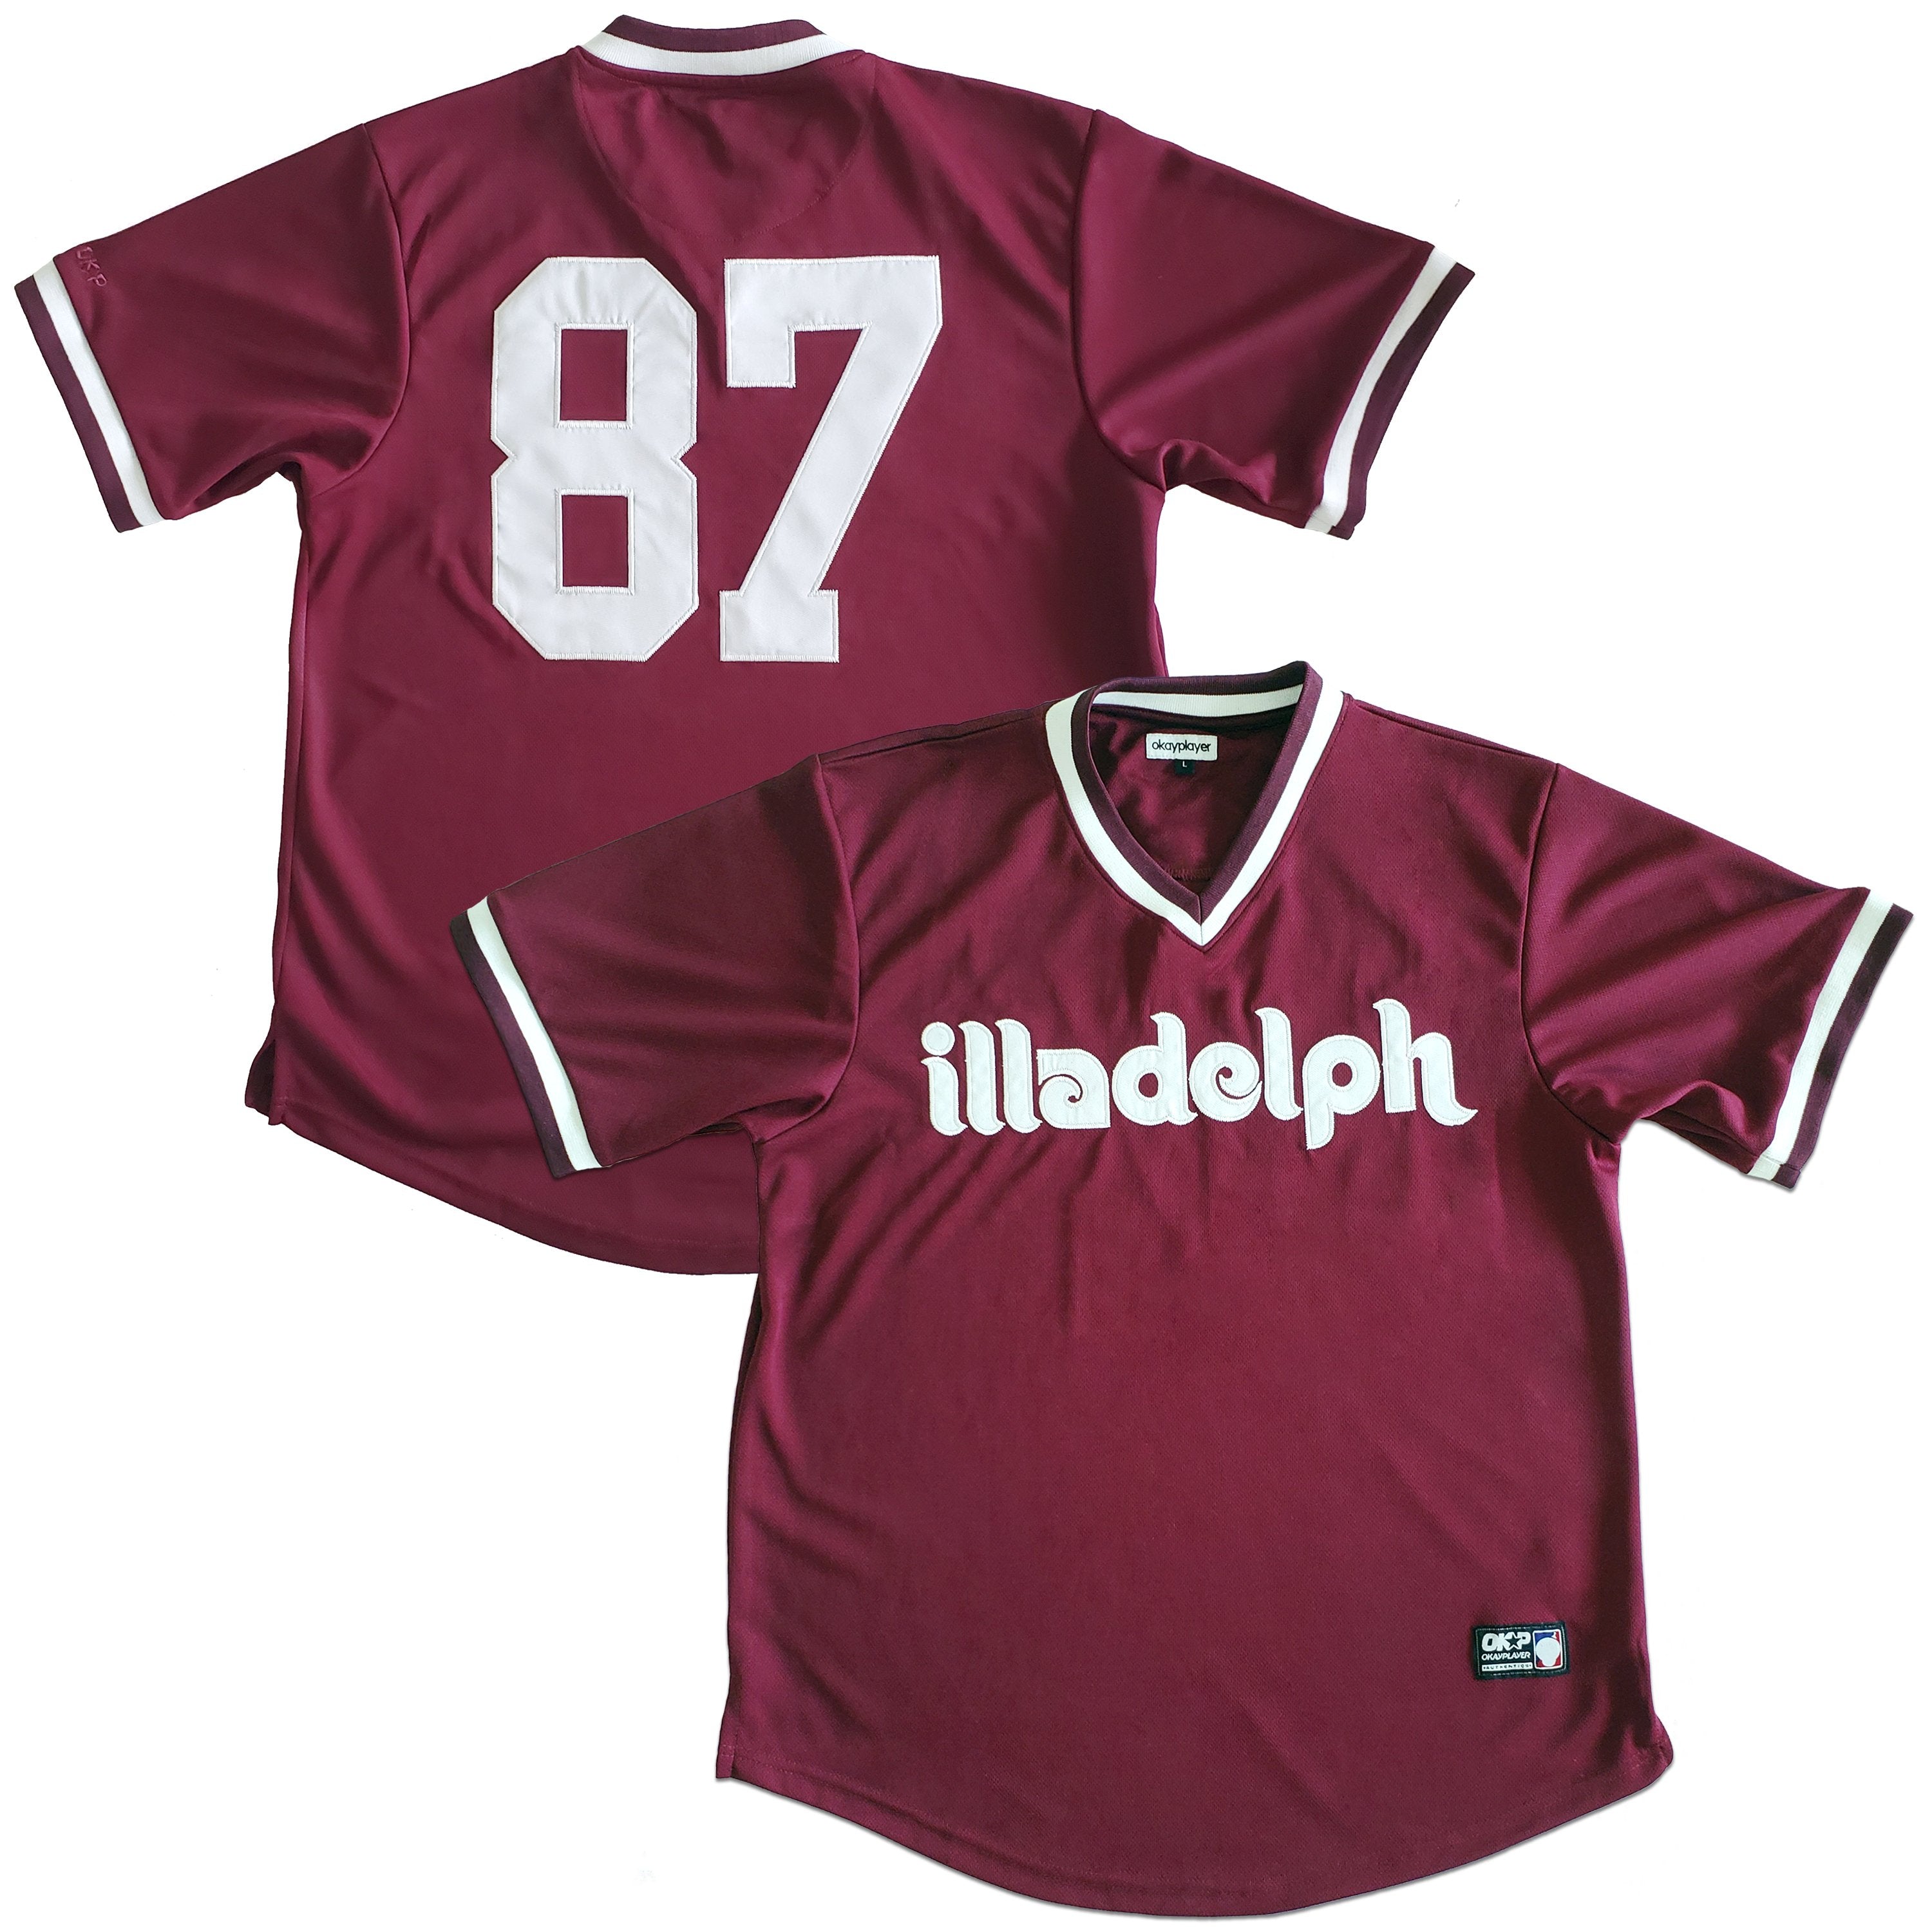 We added of our new burgundy cut & sew baseball jerseys to our